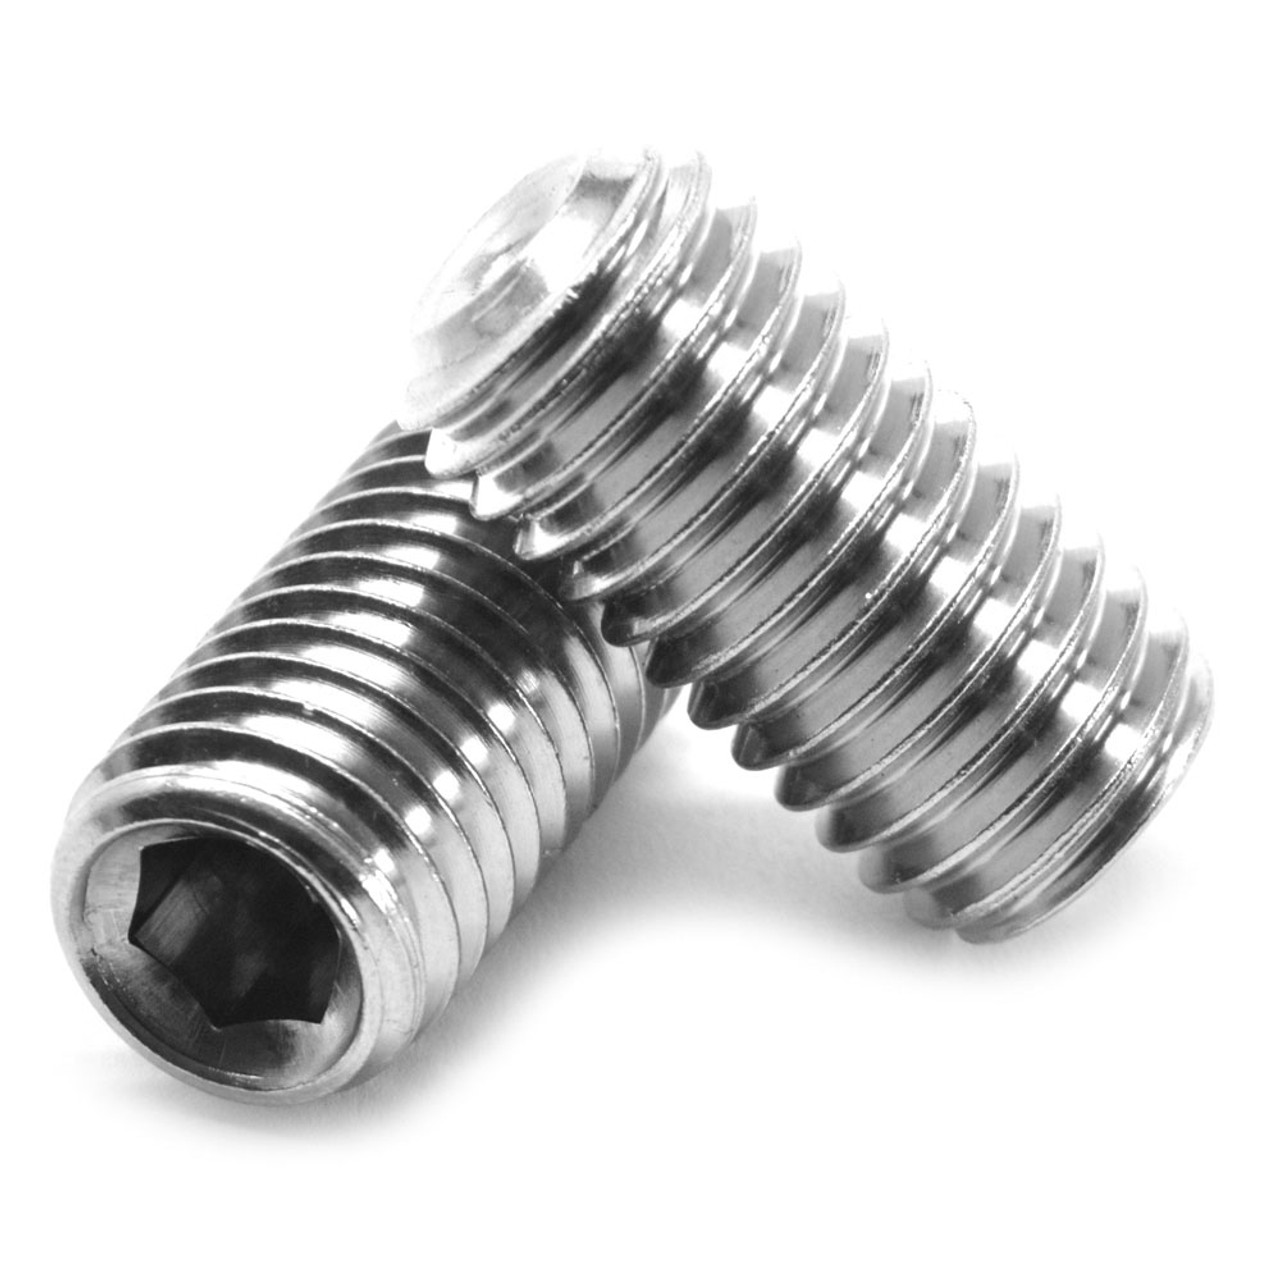 M5 x 0.80 x 25 MM Coarse Thread DIN 916 / ISO 4029 Socket Set Screw Cup Point Stainless Steel 18-8